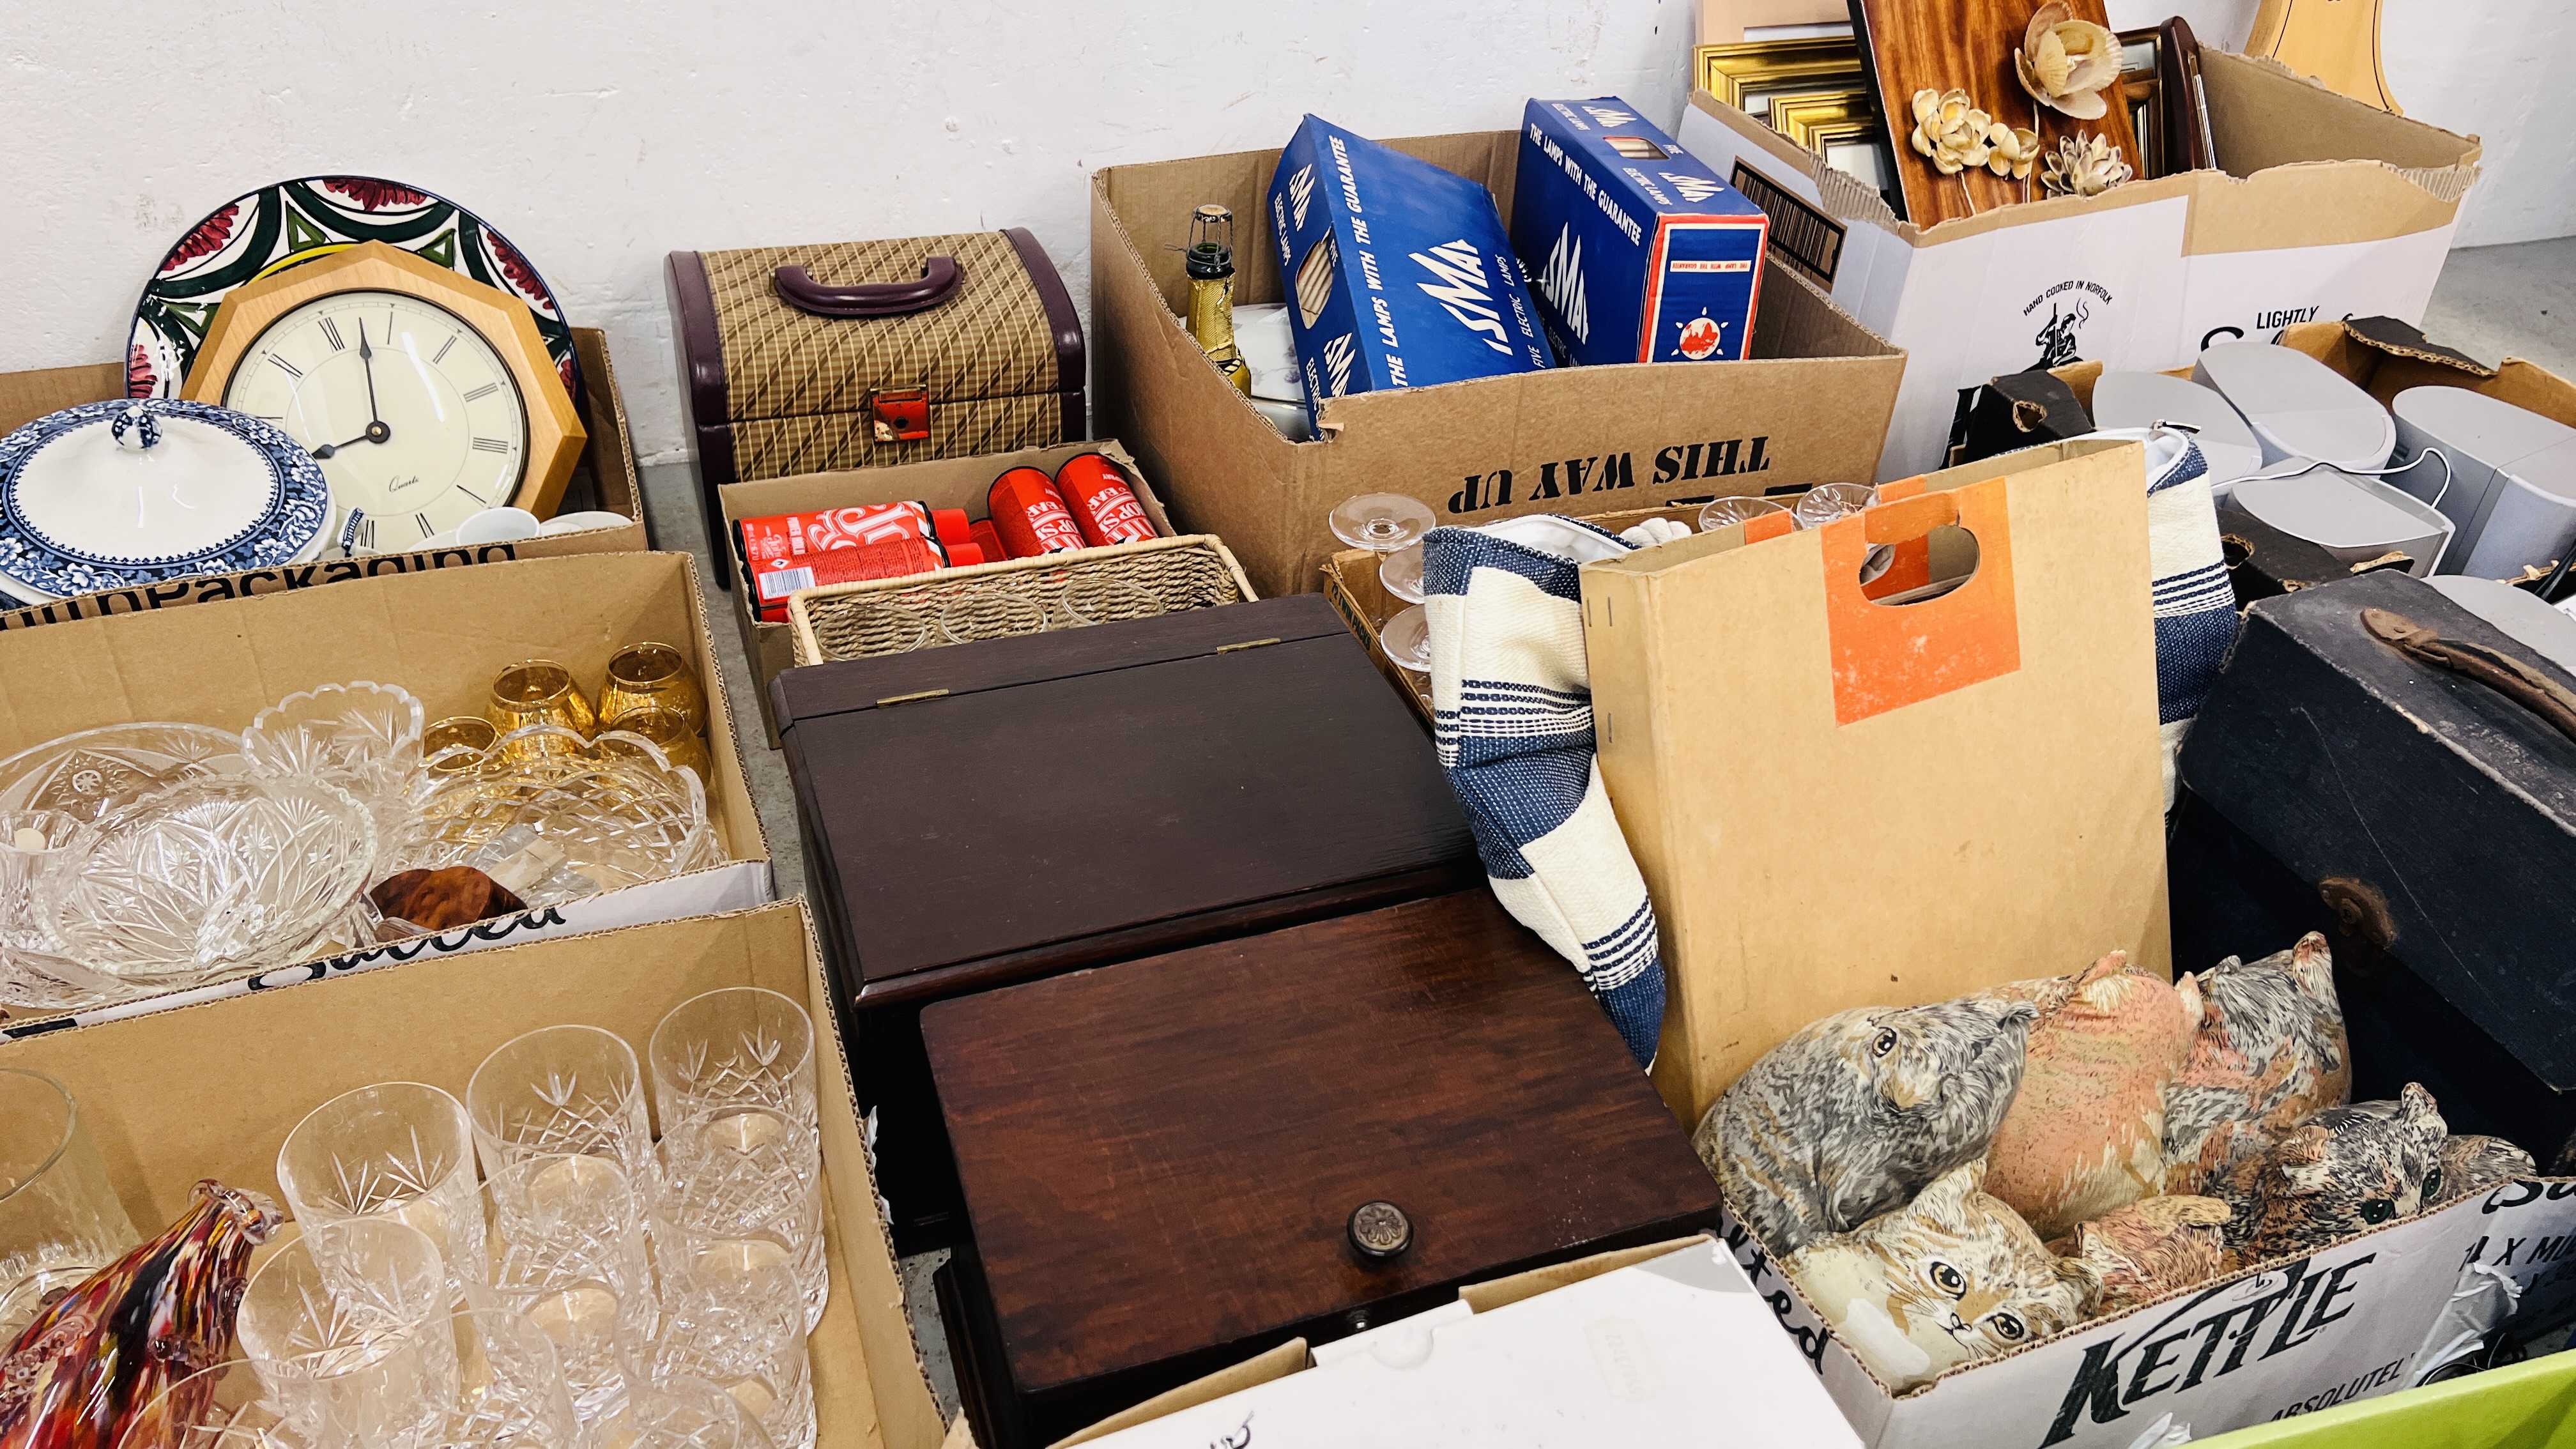 16 X BOXES OF ASSORTED HOUSEHOLD SUNDRIES TO INCLUDE GLASS & CHINA, KITCHENALIA, CAPO DE MONTE, - Image 11 of 19